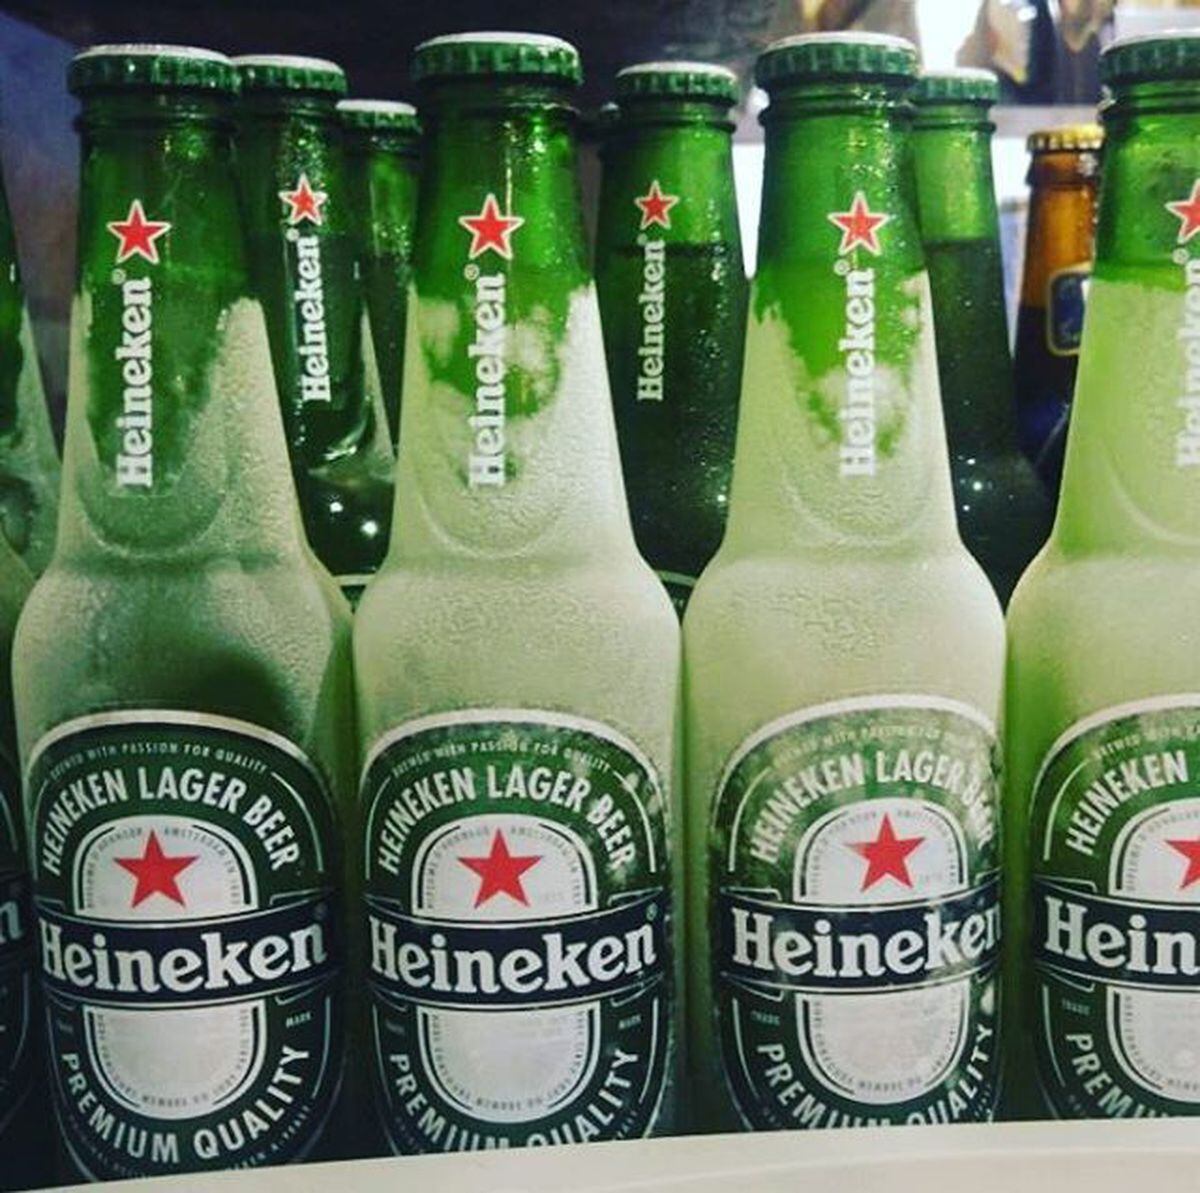 Free Heineken is available during the World Cup thanks to an offer being run by FANZO and Marston's pubs. Photo: FANZO